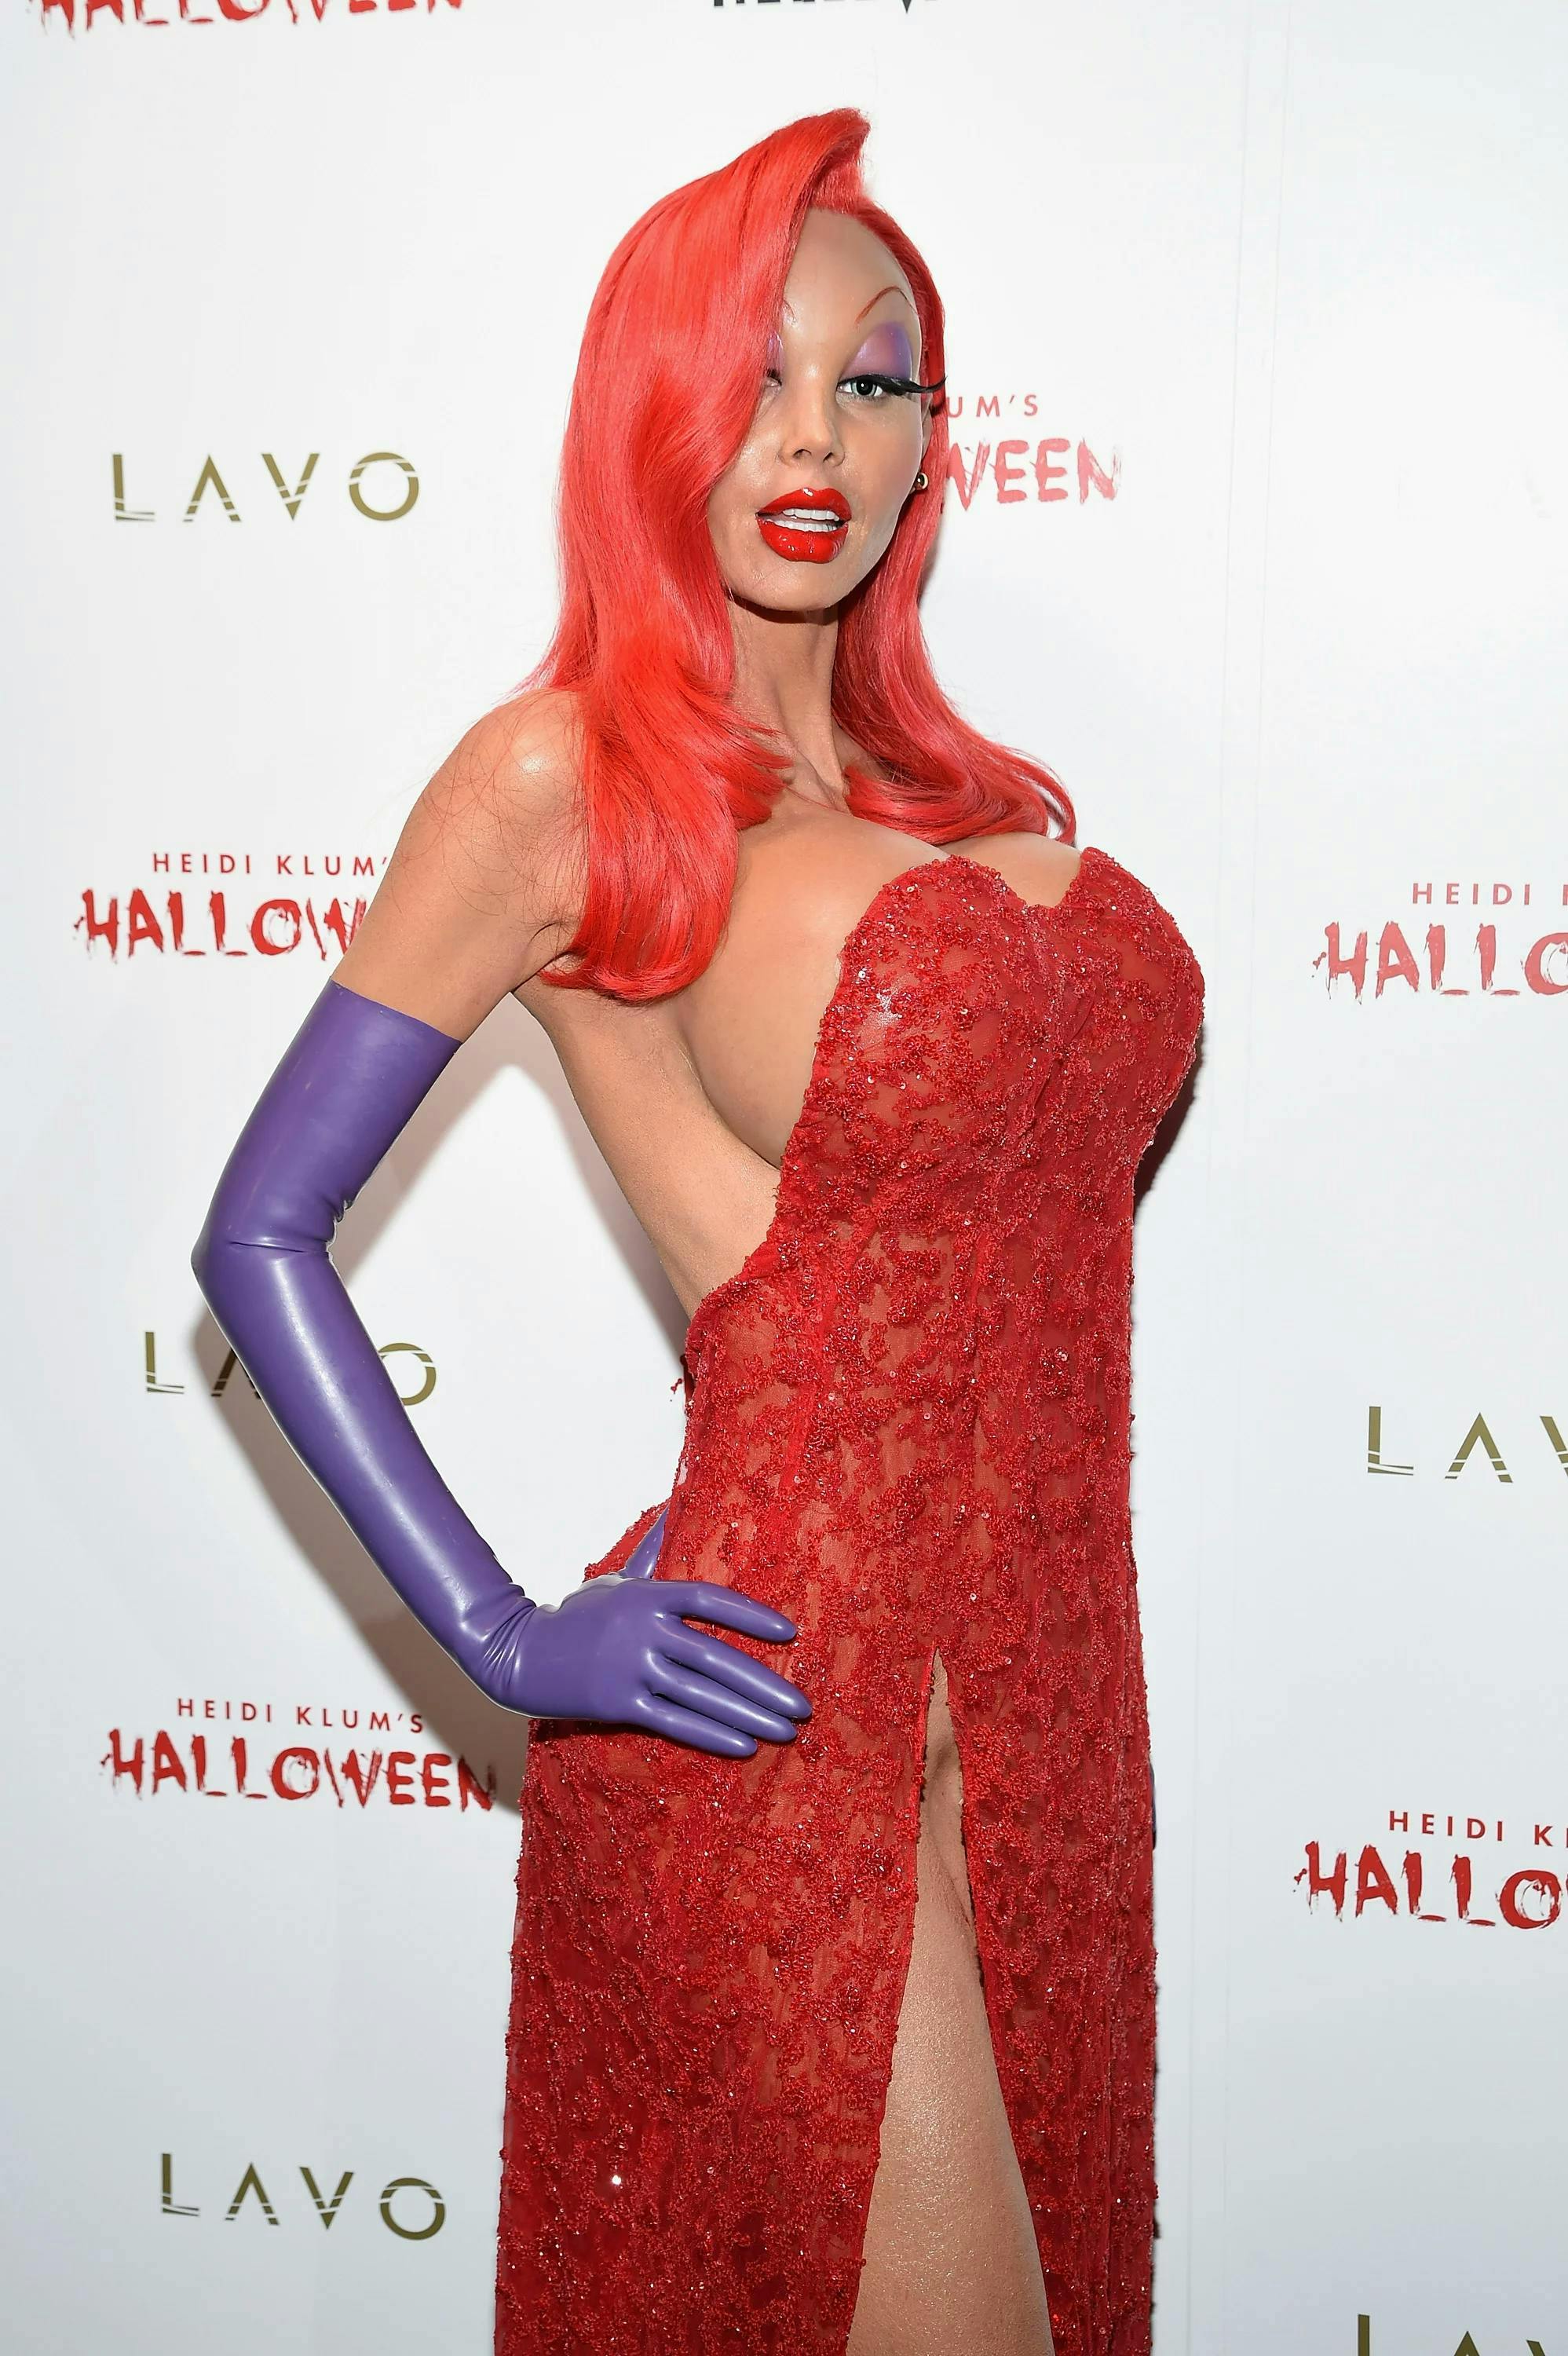 heidi klum as jessica rabbit in red sequin dress and purple gloves